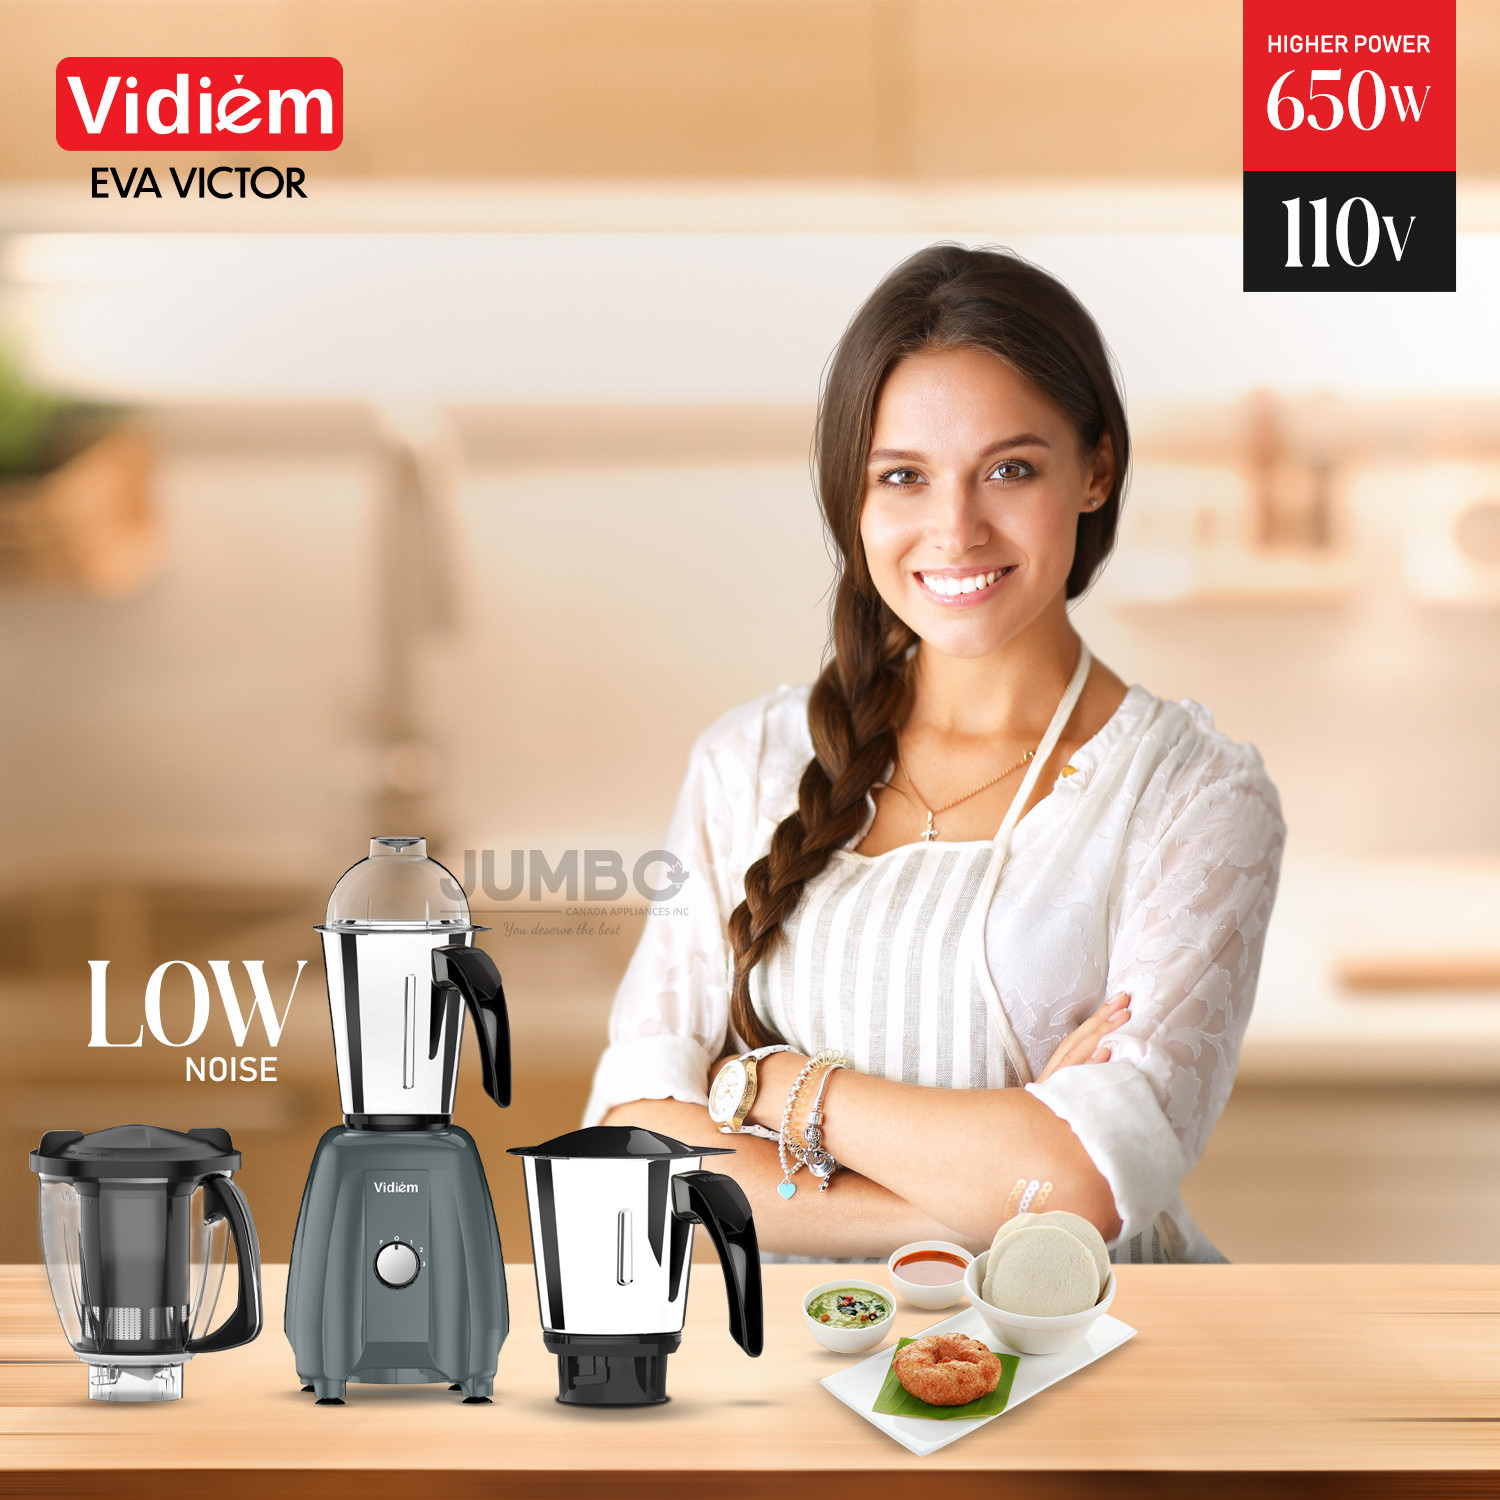 vidiem-eva-victor-650w-110v-stainless-steel-jars-indian-mixer-grinder-spice-coffee-grinder-for-use-in-canada-usa6